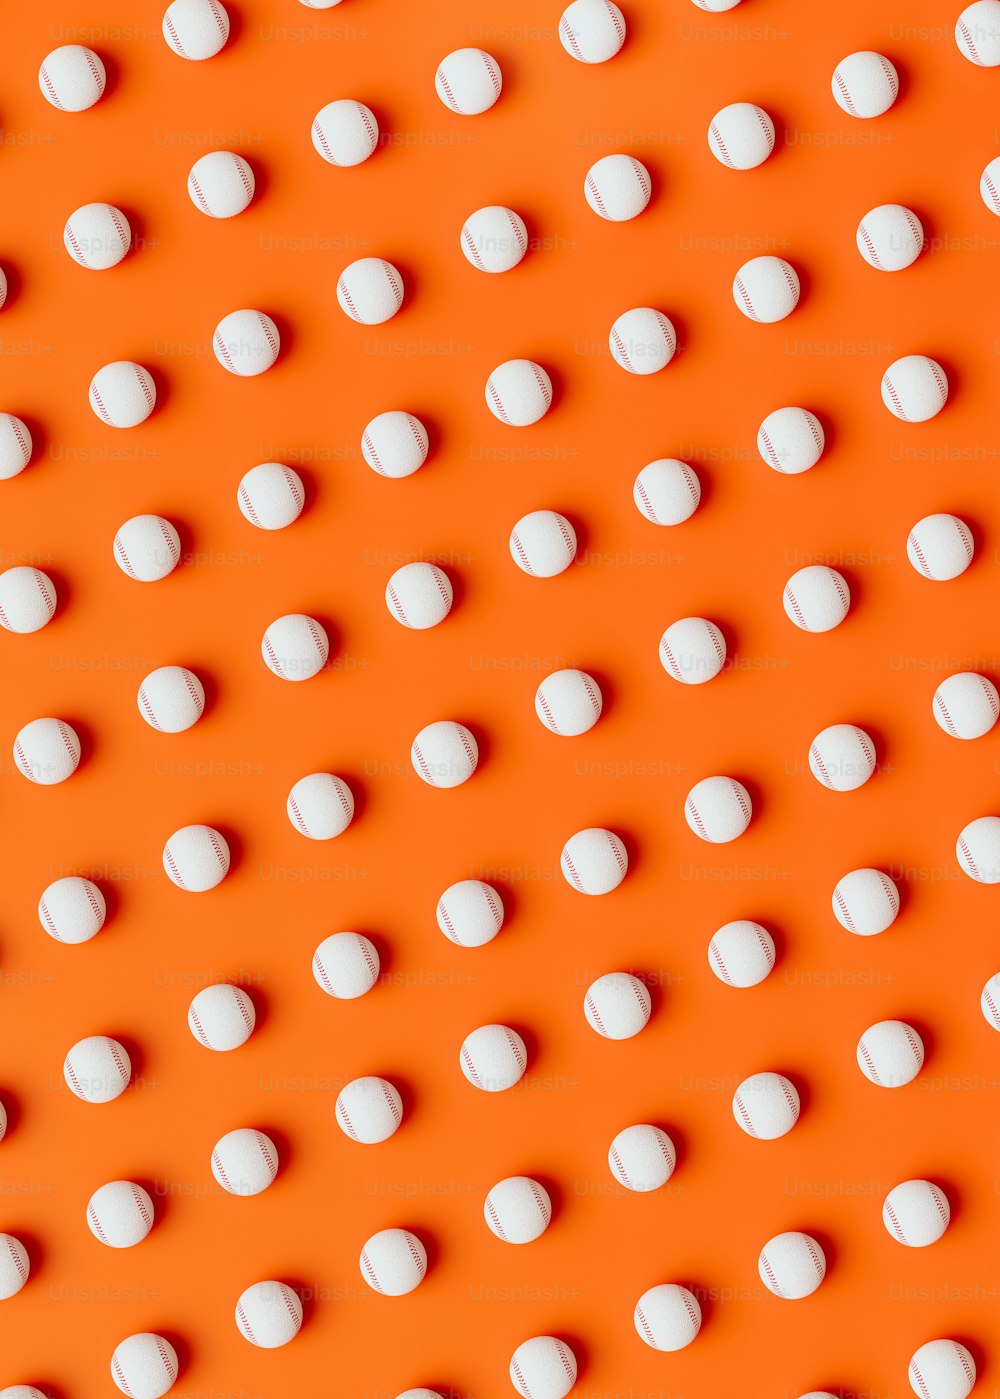 an orange background with white polka dots